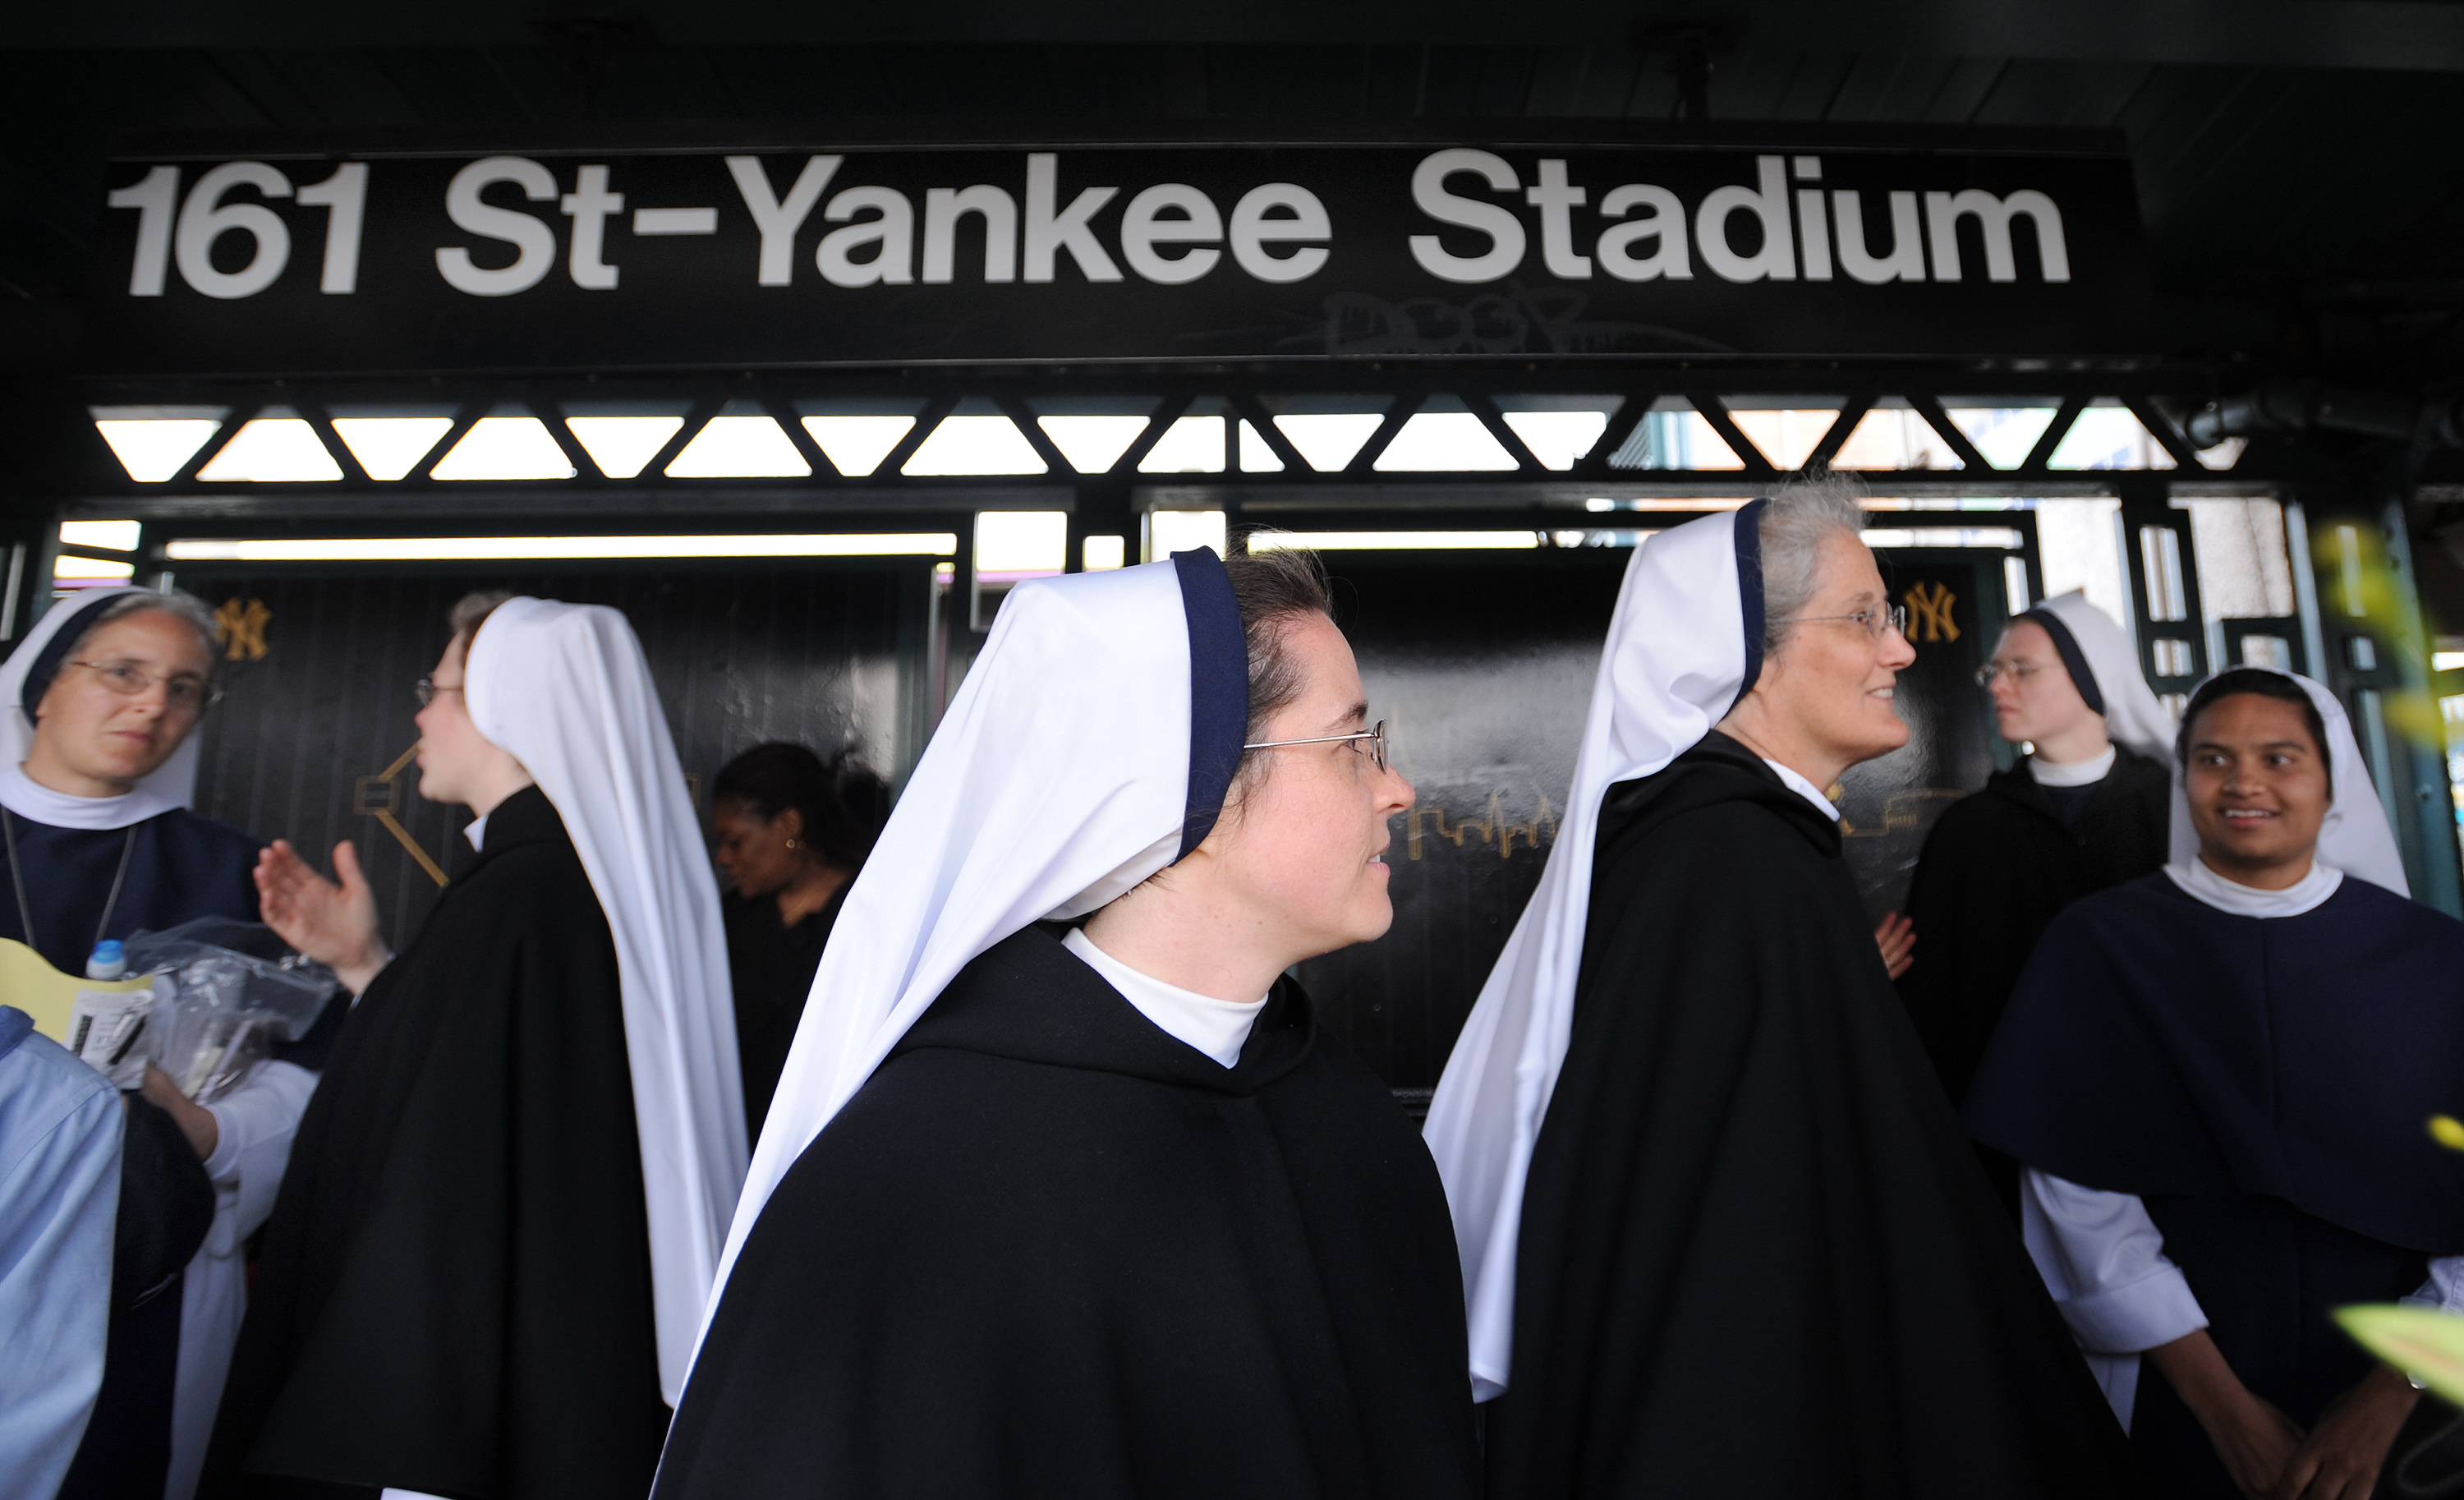 Some of the Sisters of Life nuns joined the faithful riding the 4 train home from Yankee Stadium after Pope Benedict XVI held mass at the stadium . (New York Daily News Archive&mdash;NY Daily News via Getty Images)